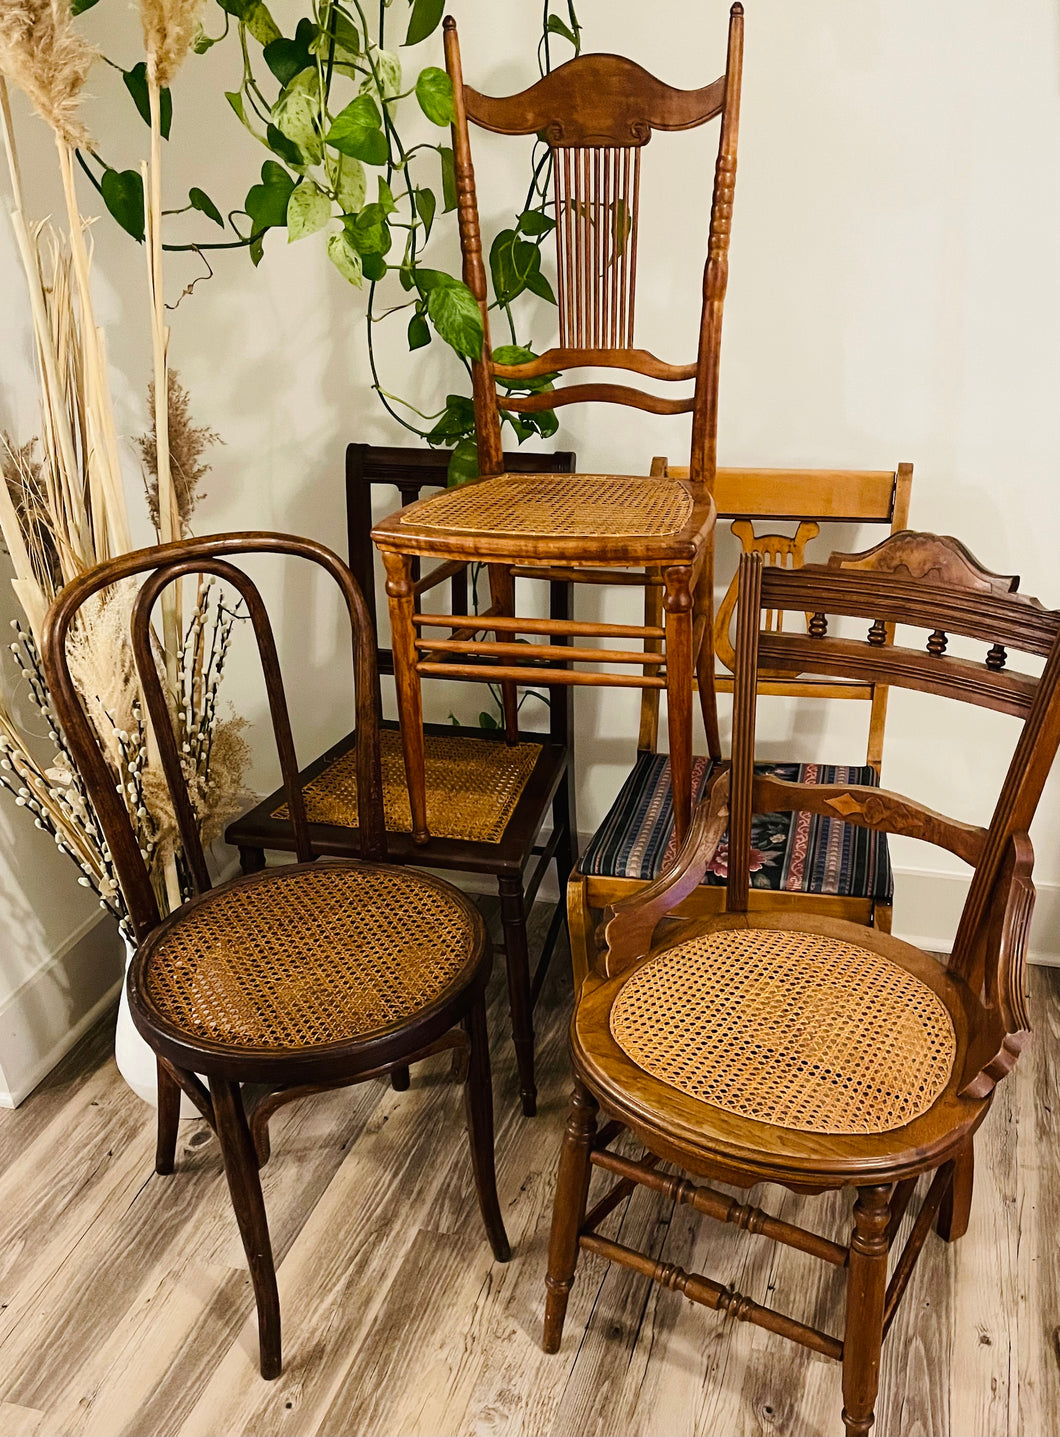 mismatched wooden chairs